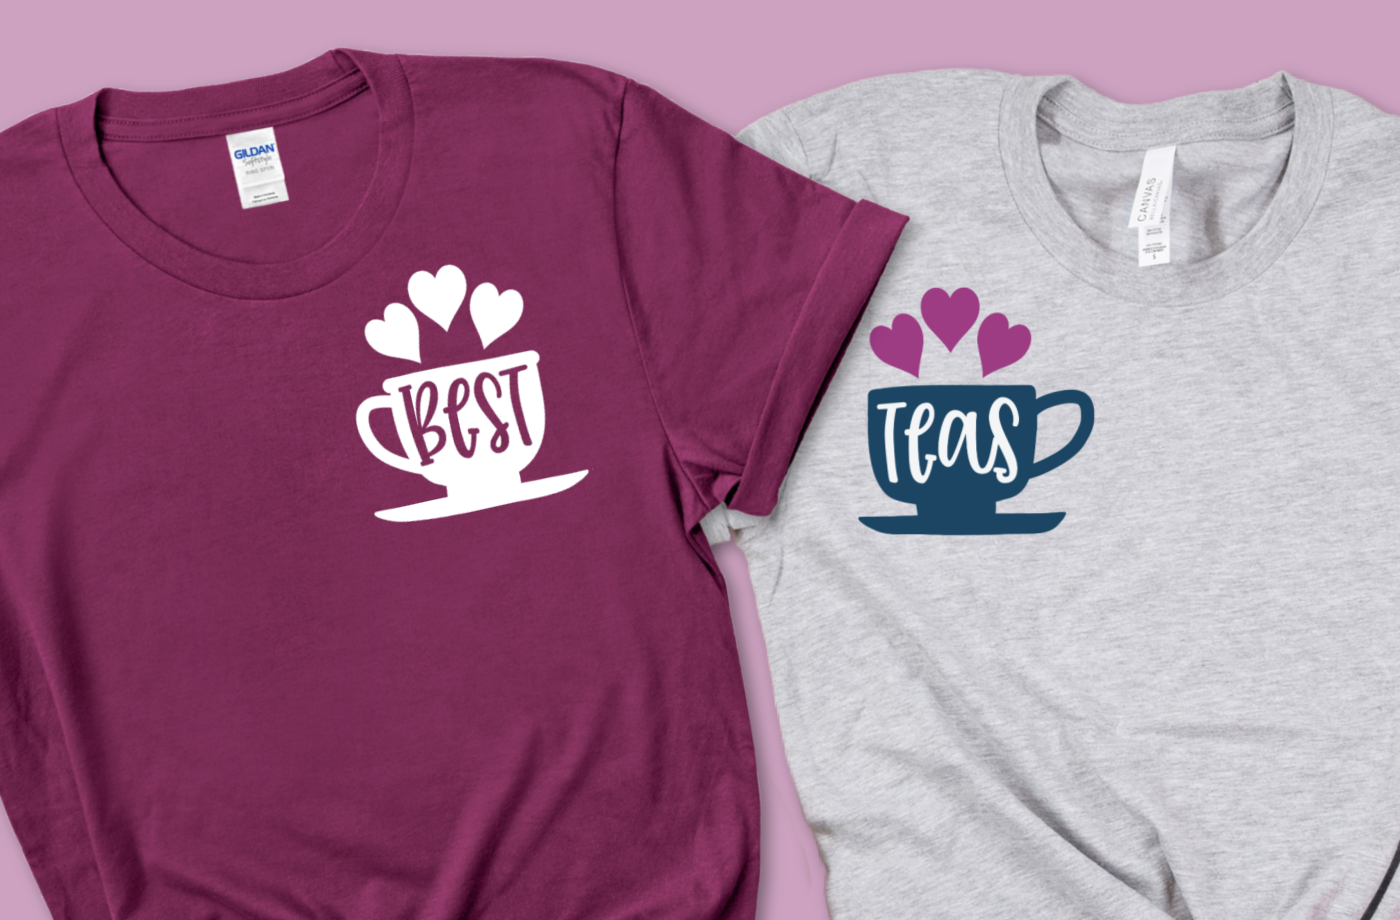 purple and grey coordinating shirts with Best and Teas designs